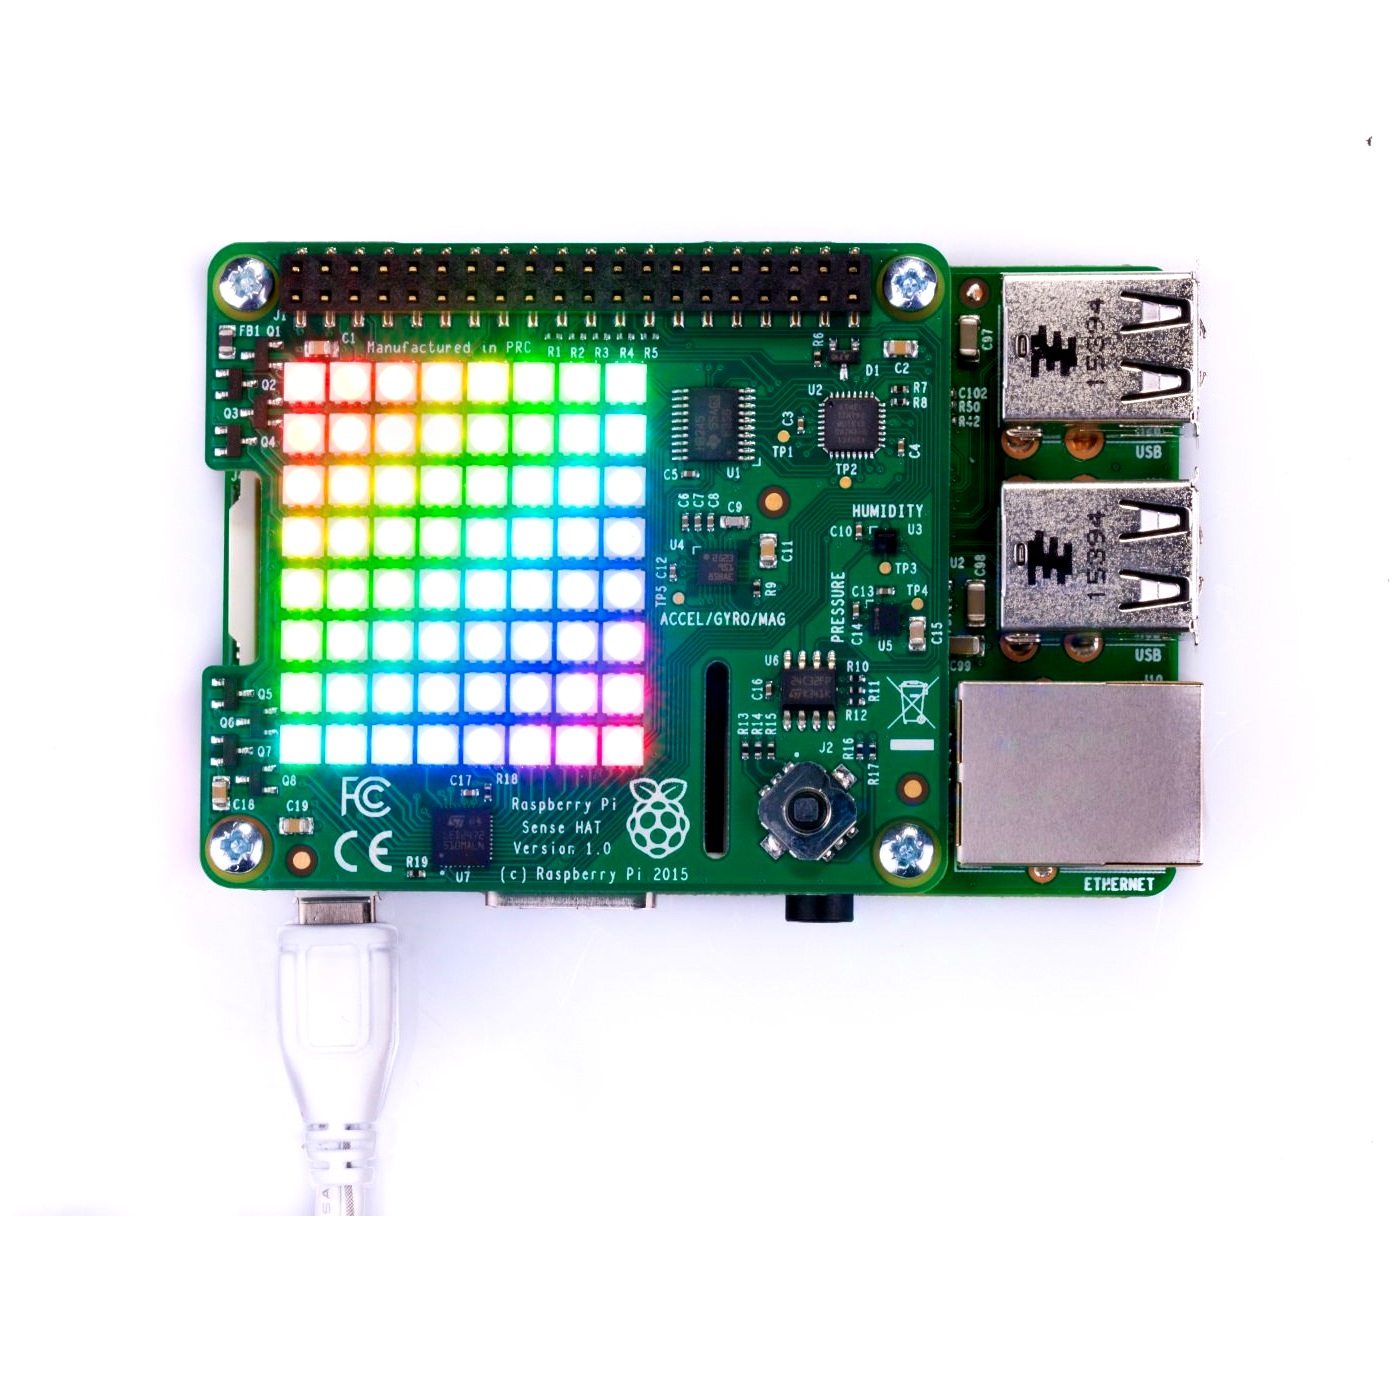 Pi hats. Raspberry amp hat. Audio Module for Raspberry Pi hat. Hat and humid.